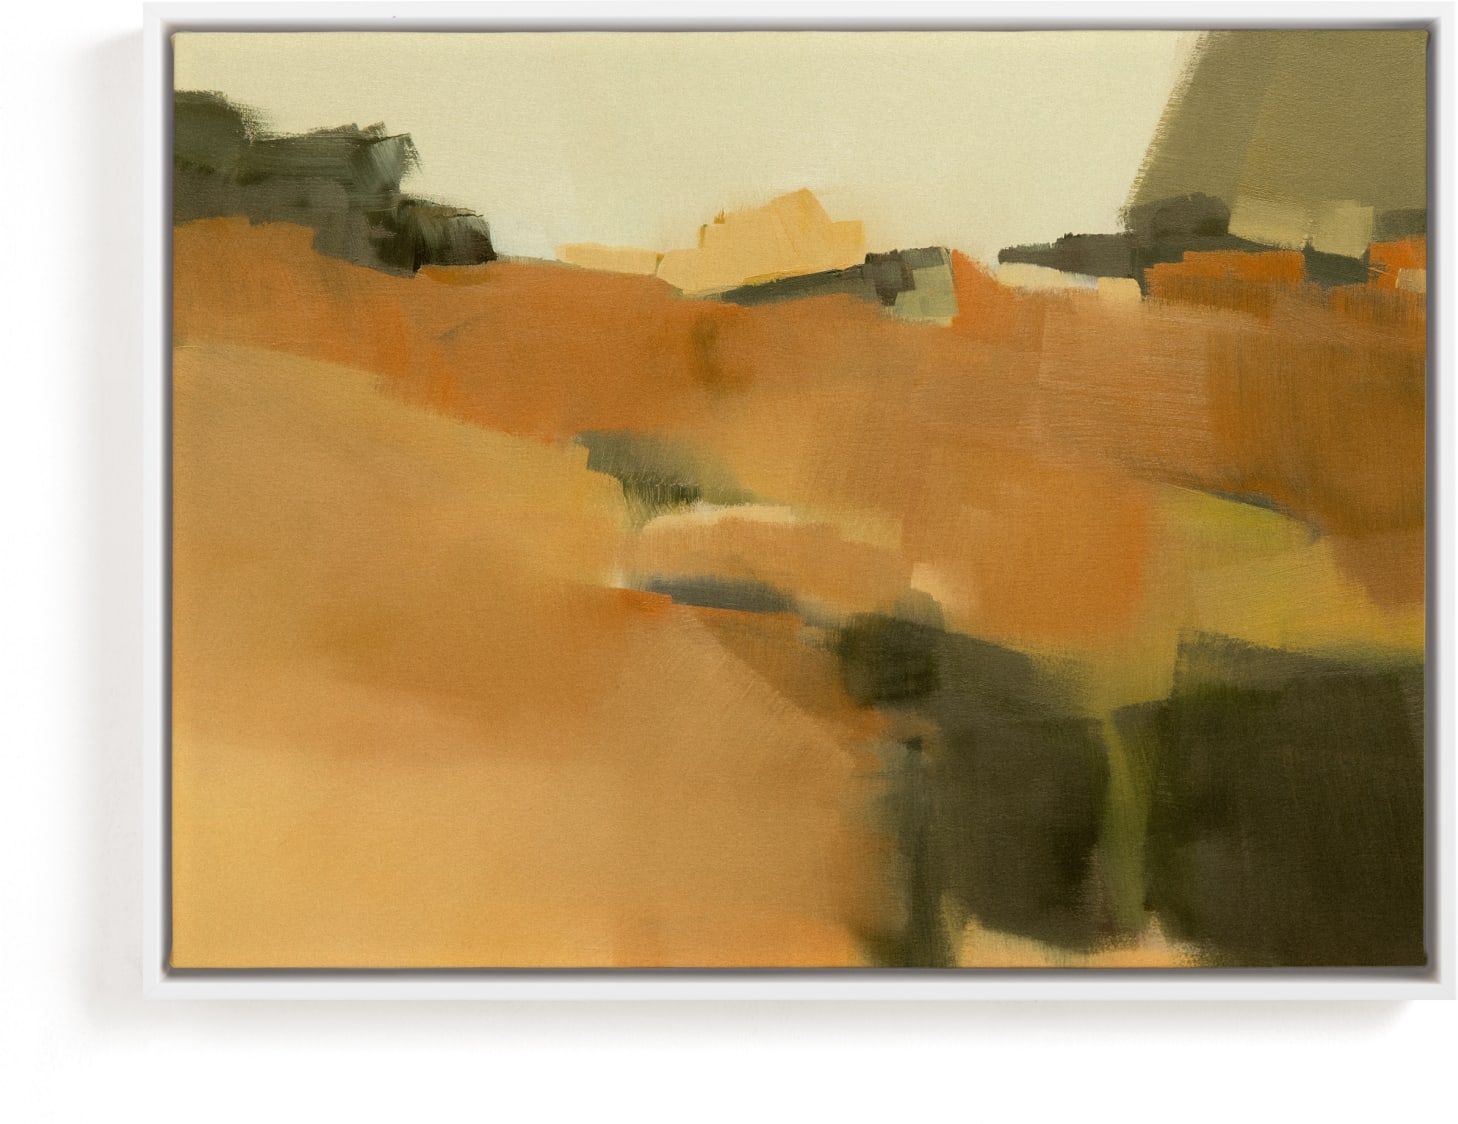 This is a yellow, orange, gold art by Ashley Armistead called Strata.